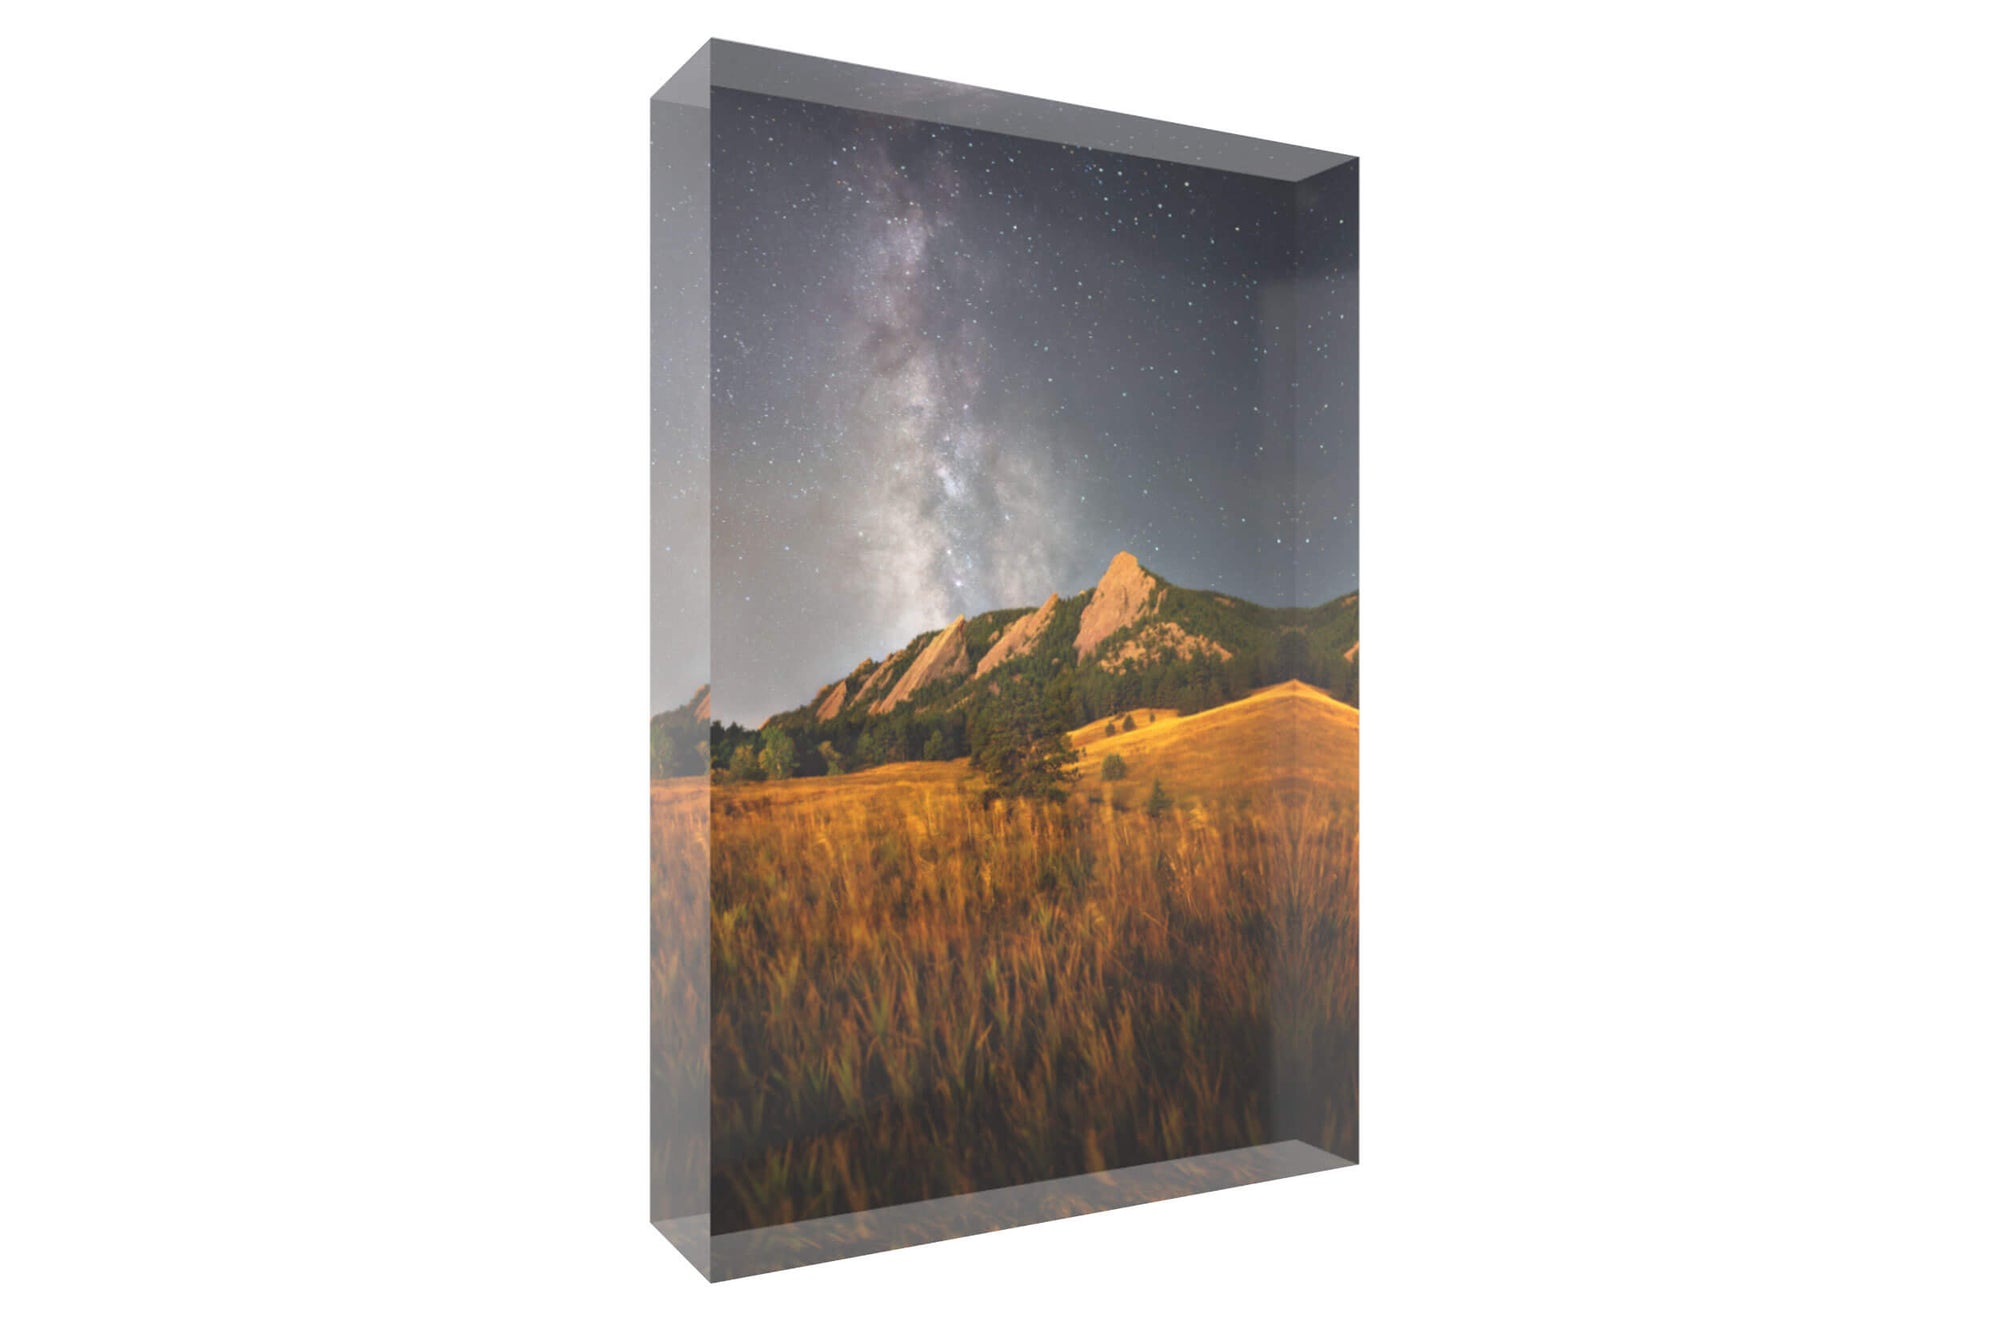 A picture of the Boulder Flatirons shown as an acrylic block.